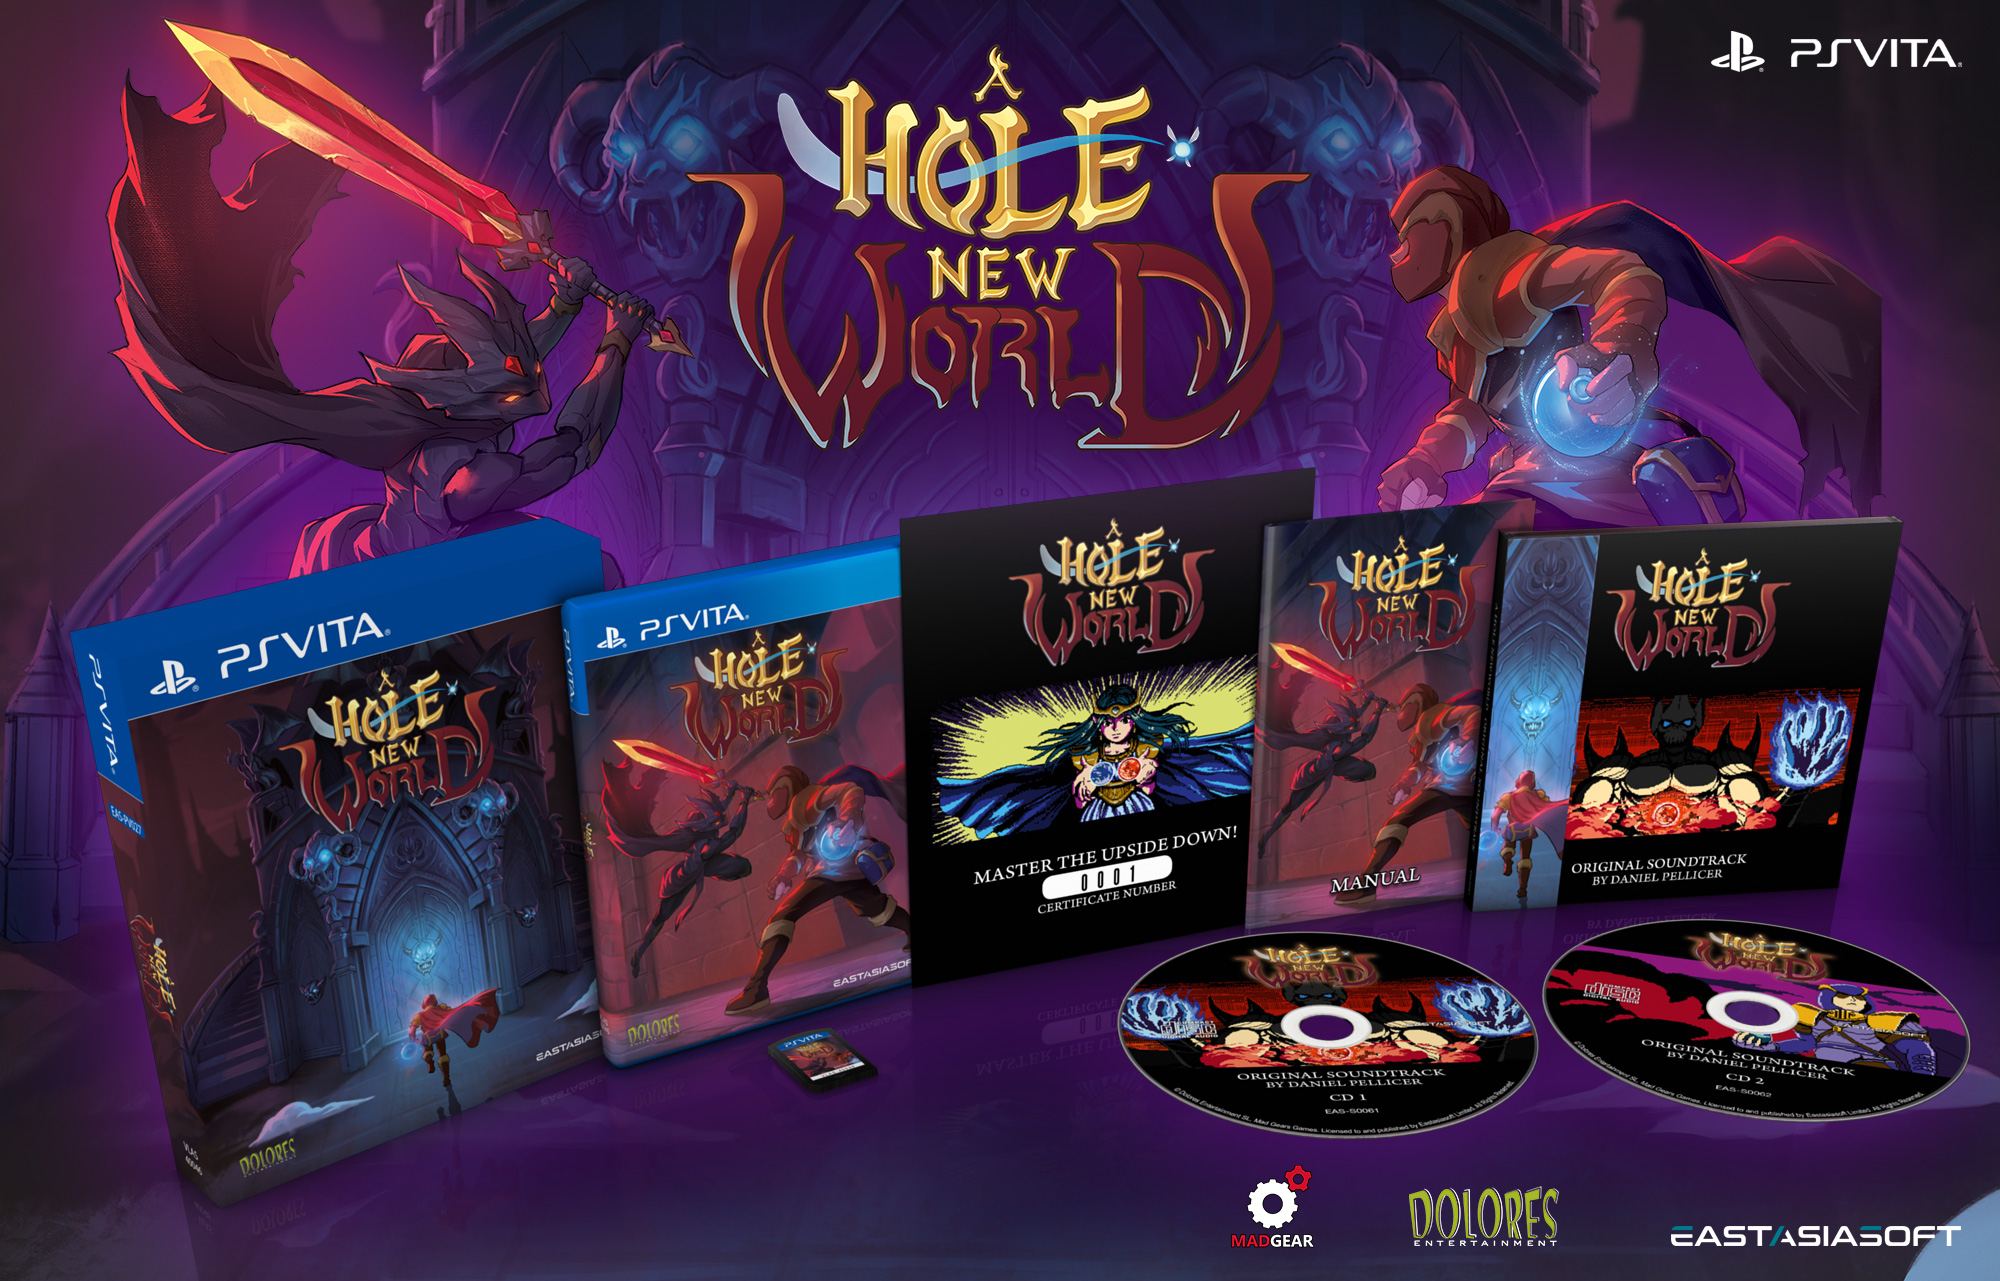 A Hole New World [Limited Edition] LE PLAY EXCLUSIVES for 